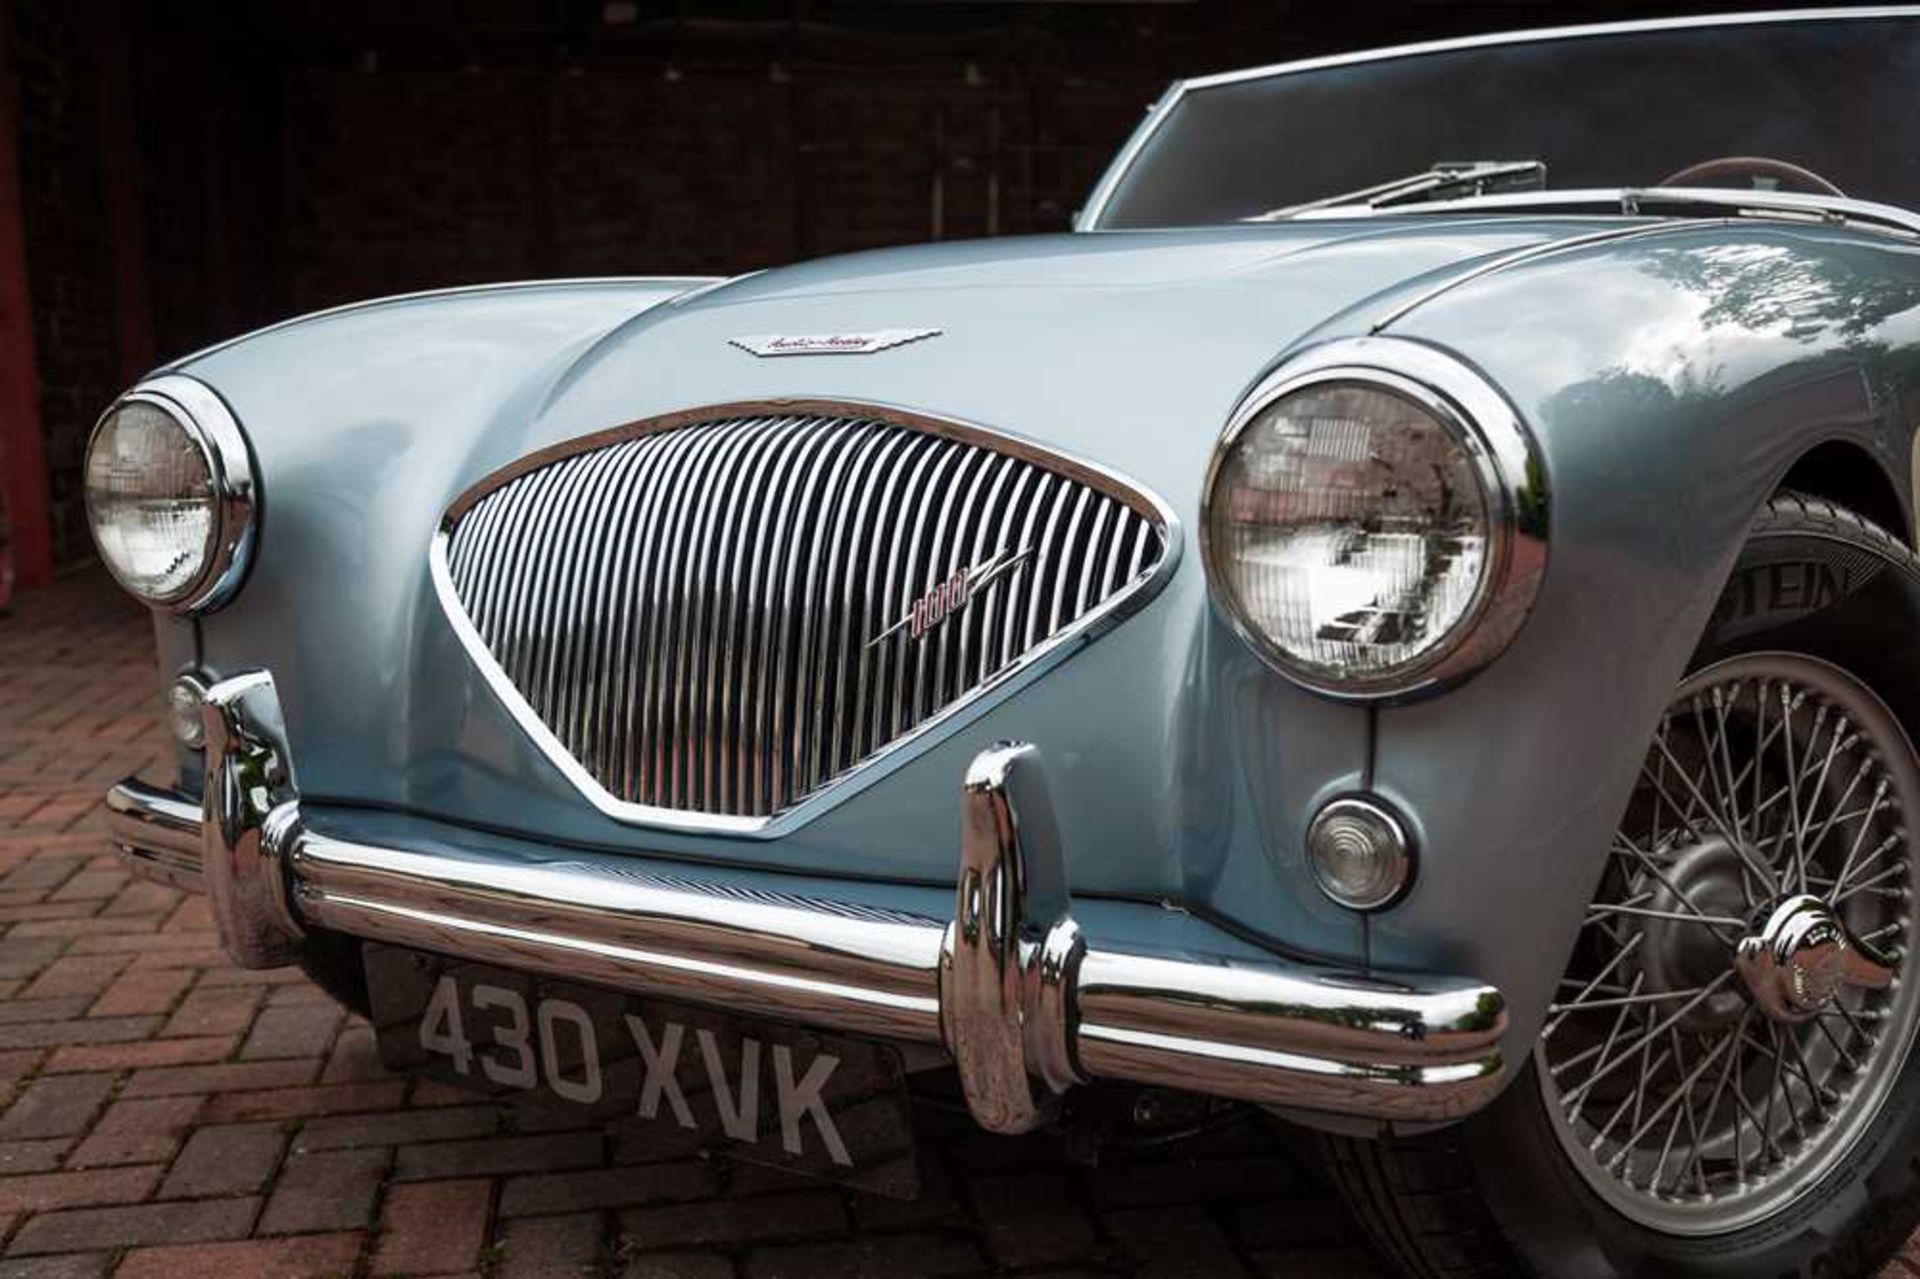 1955 Austin-Healey 100/4 Subtly Upgraded with 5-Speed Transmission and Front Disc Brakes - Image 33 of 54